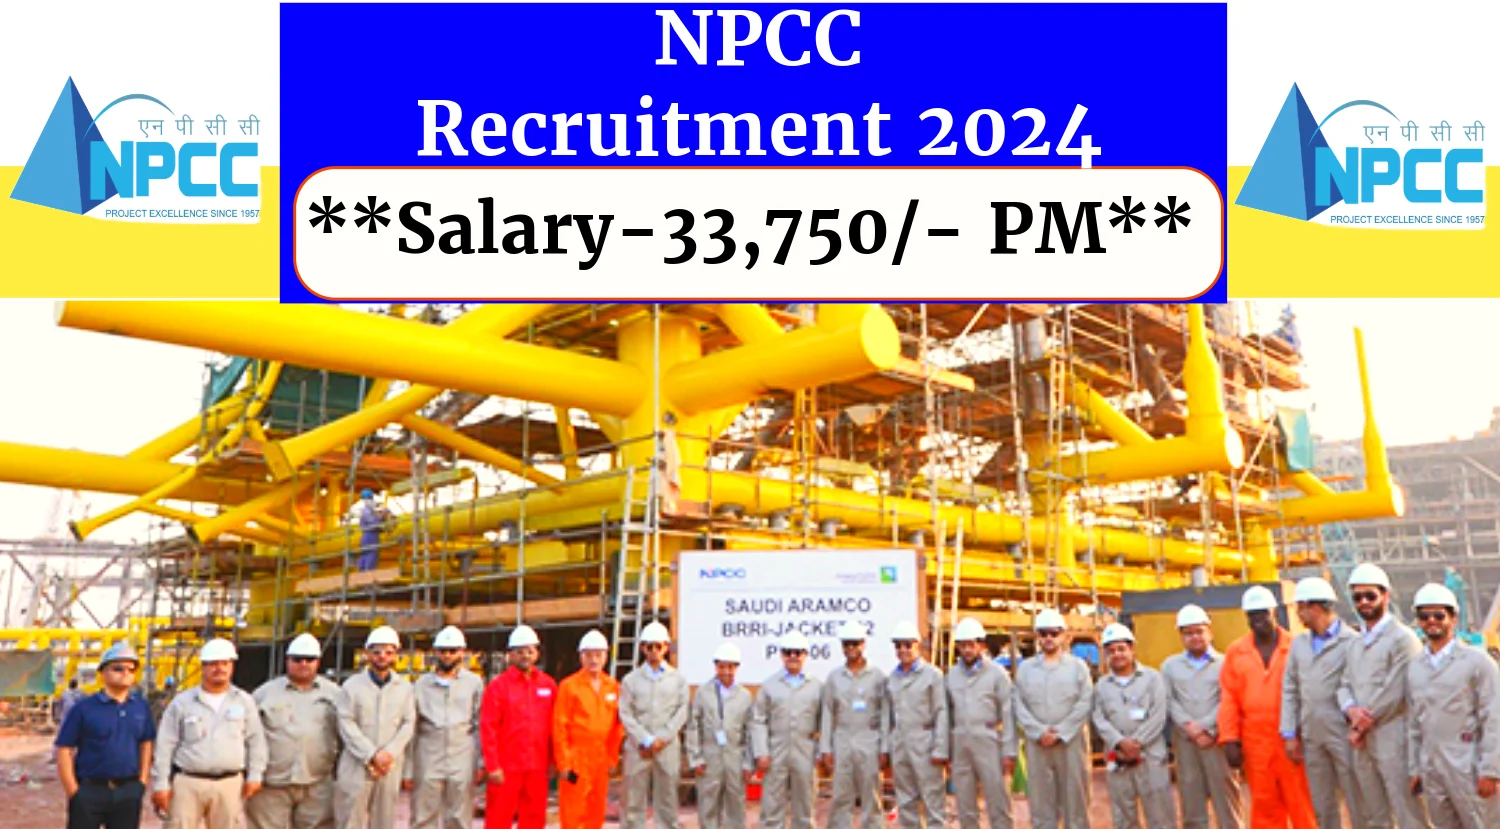 NPCC Recruitment 2024 Notification Out for Associate Post, Check Eligibility, Selection and Application Process Now